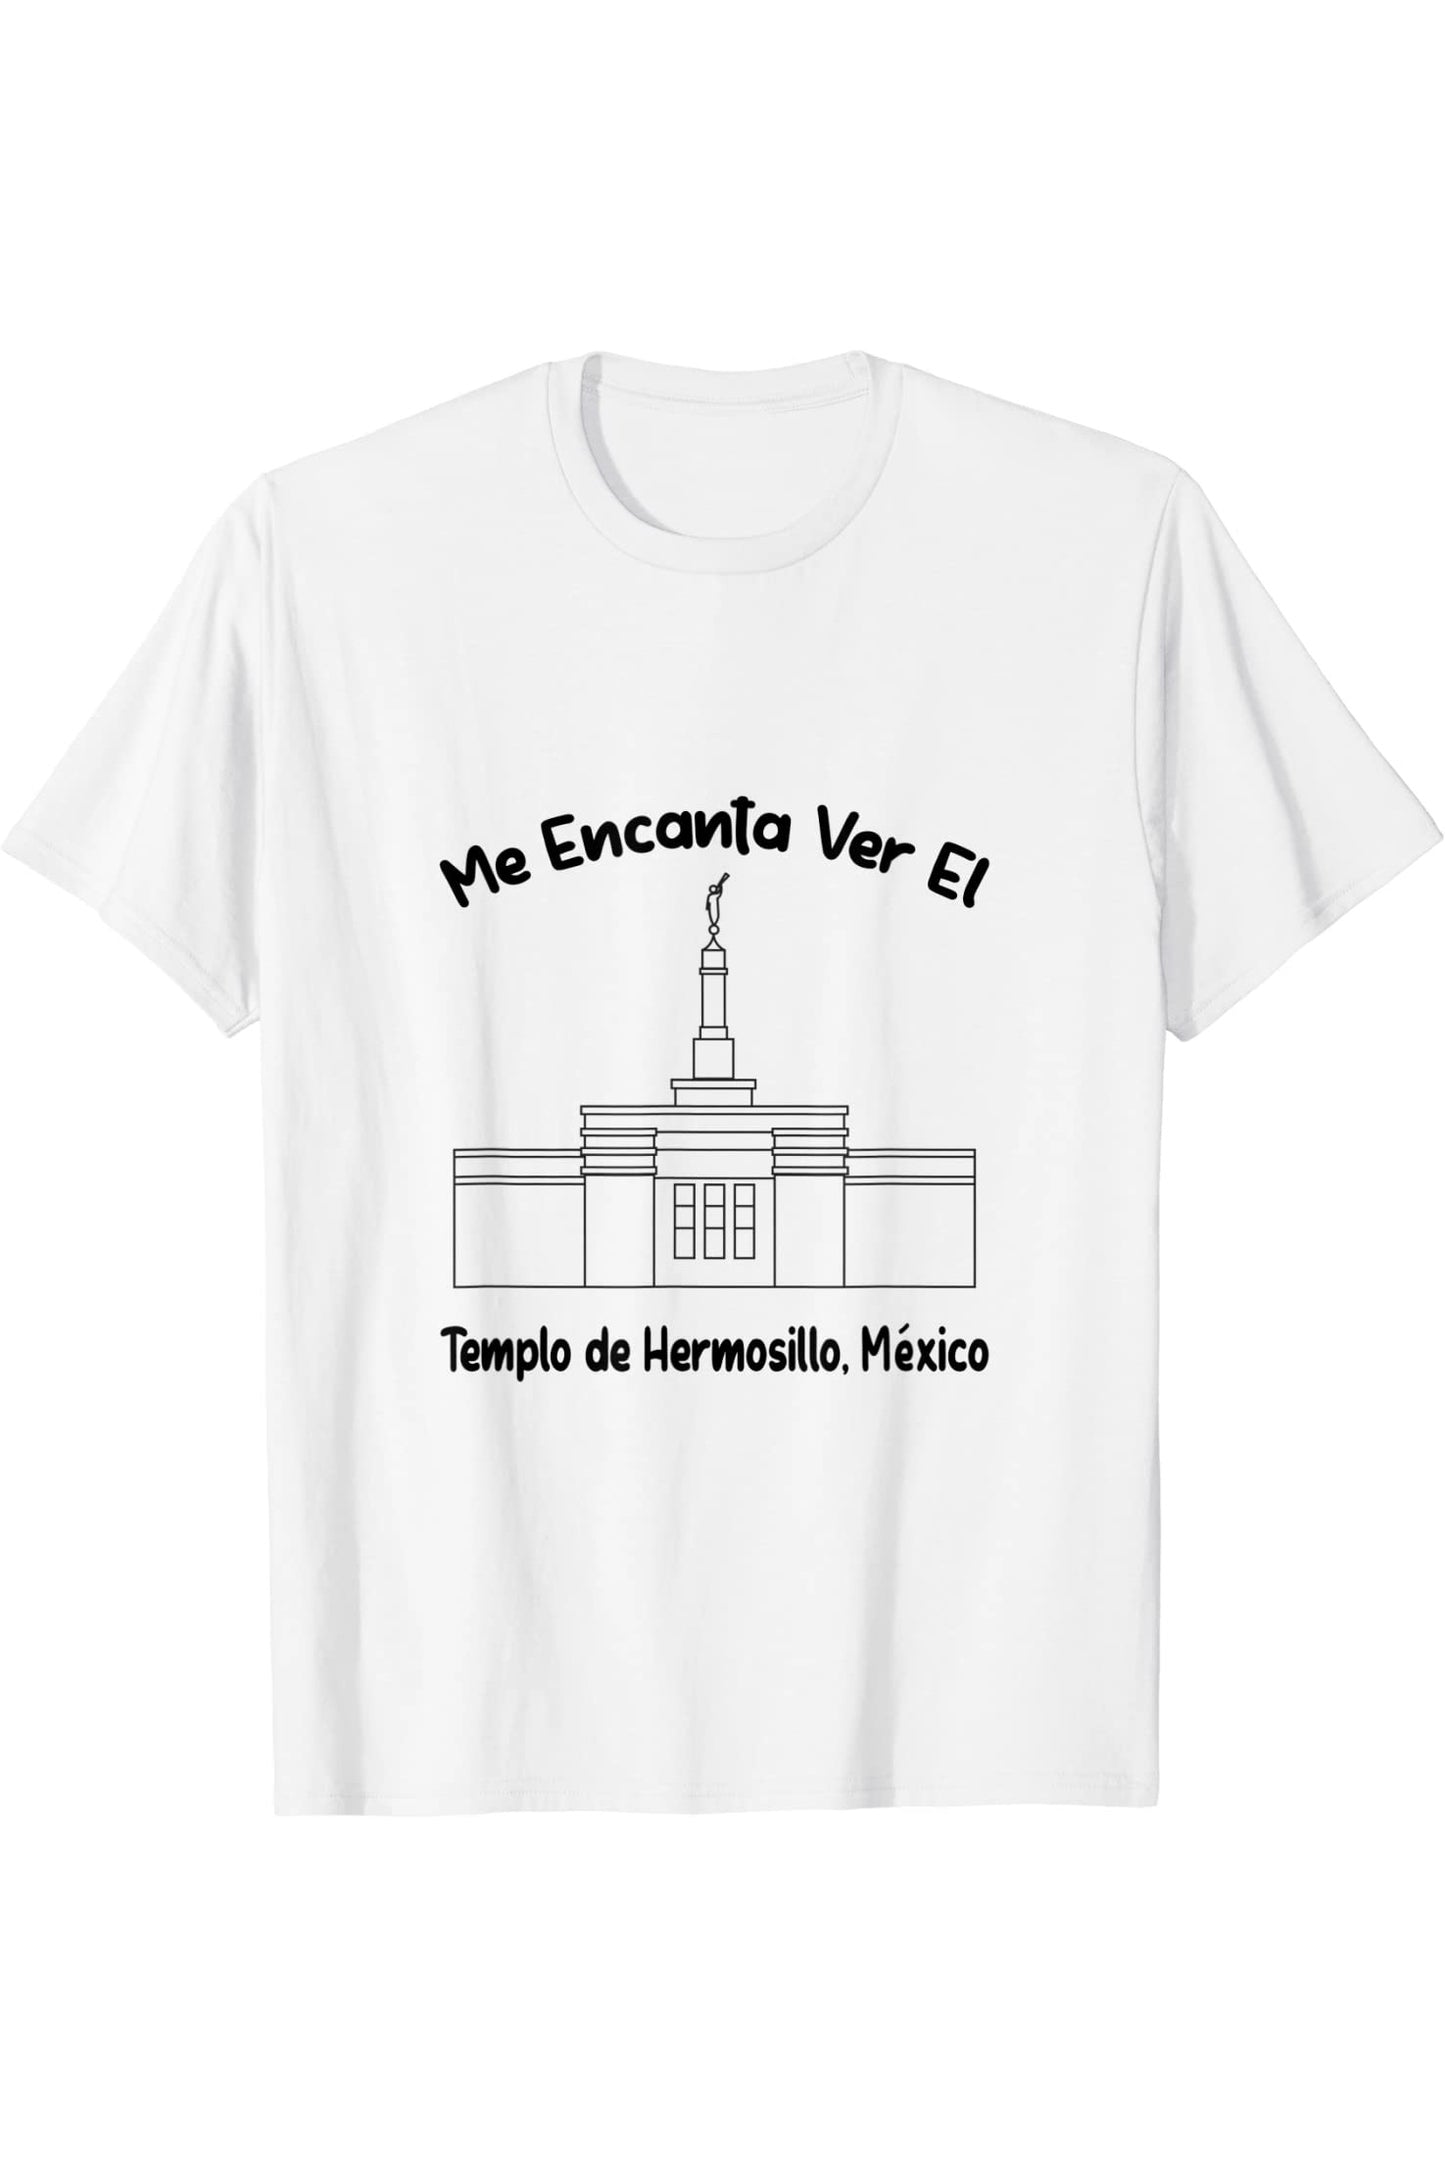 Hermosillo Mexico Temple T-Shirt - Primary Style (Spanish) US